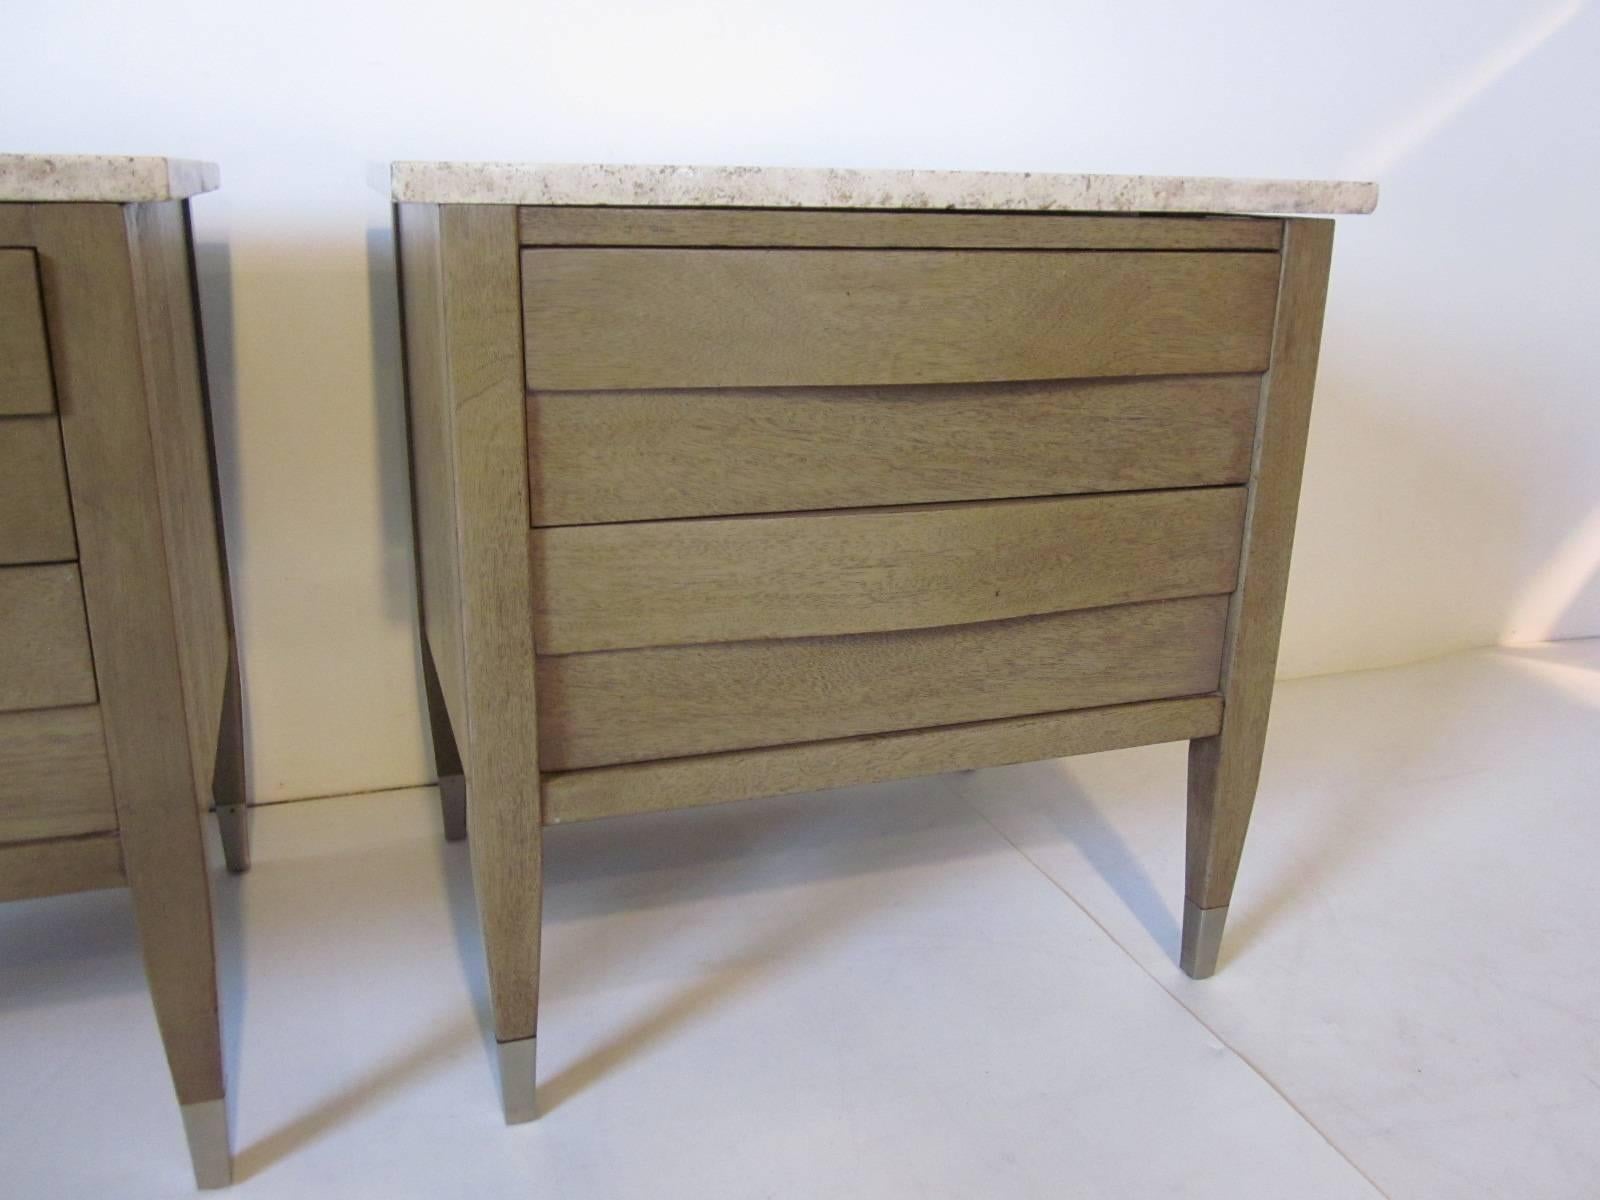 A pair of mahogany nightstands topped with beautiful Italian travertine marble with two sculptural drawer fronts and stainless capped feet. Designed in the style of Singer and Sons but manufactured by American of Martinsville.